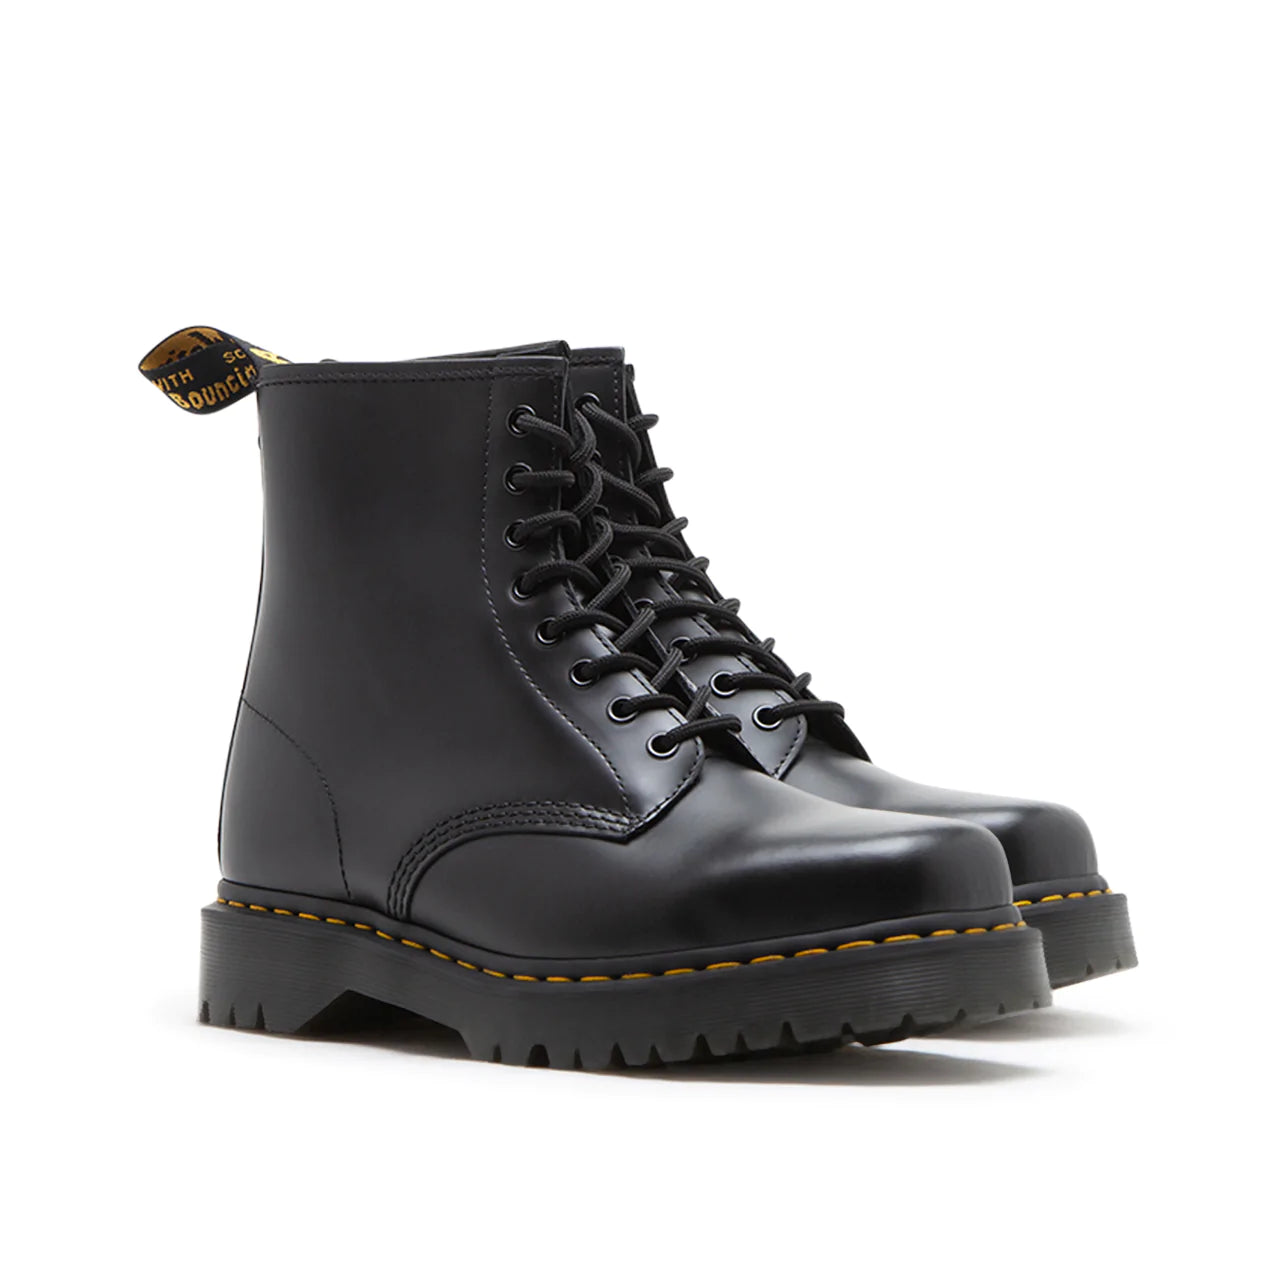 Dr. Martens 1460 Bex Squared Toe Leather Lace Up Boots (Black)